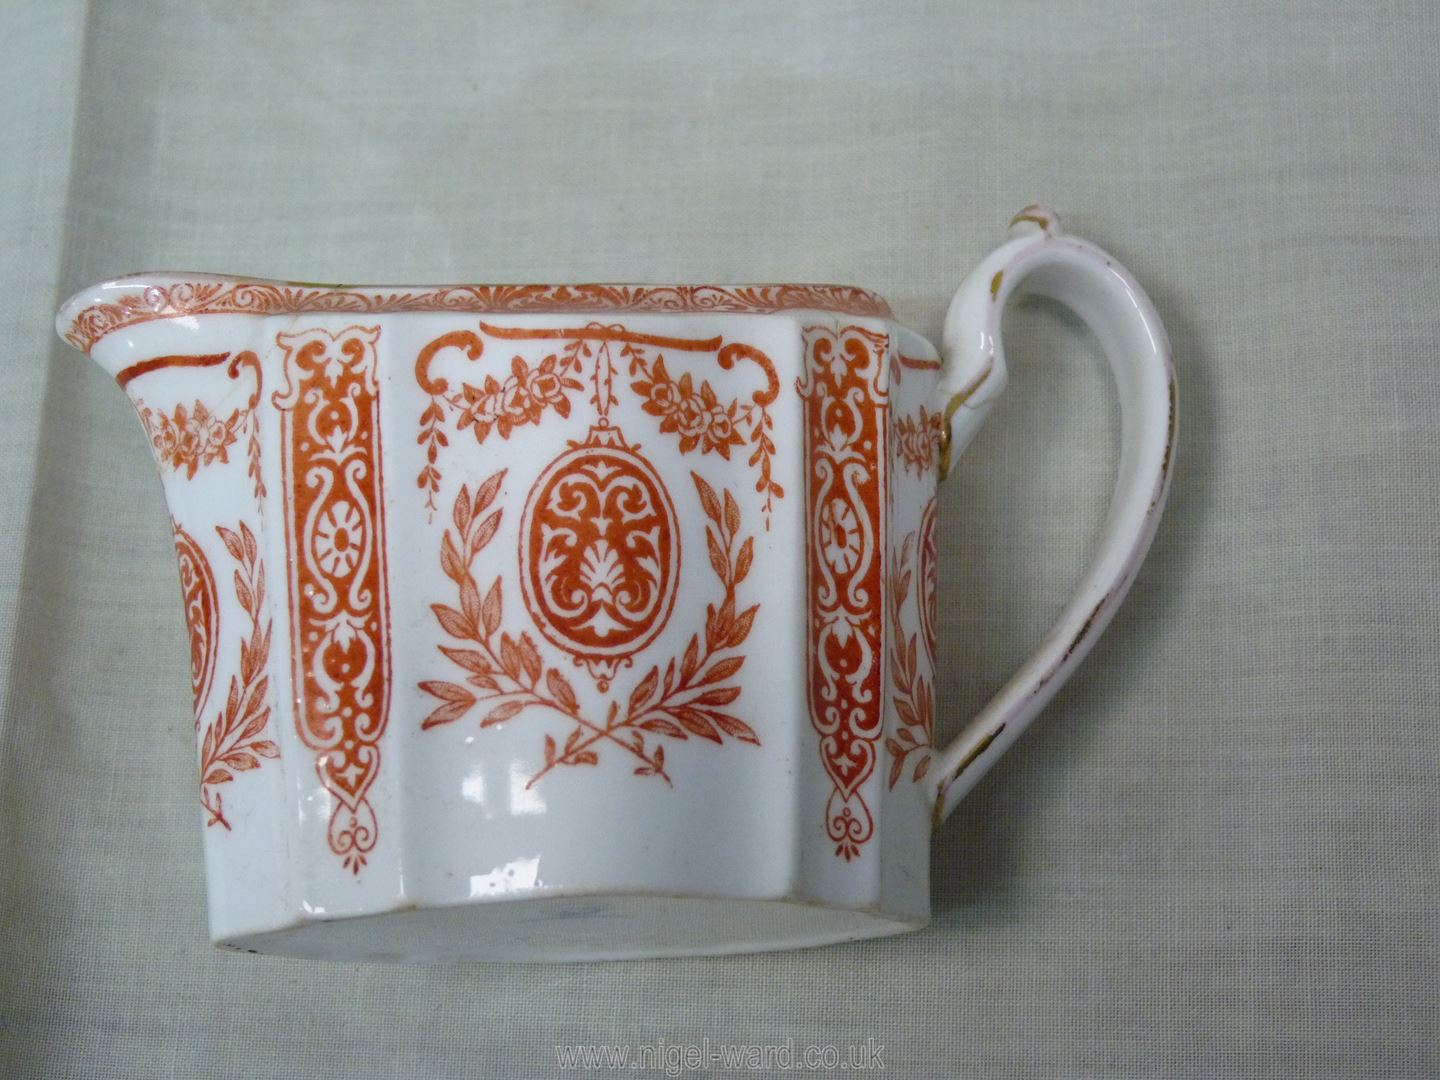 A Victorian Teaset in red and cream by Wedgwood including teapot, four cups, - Image 14 of 30